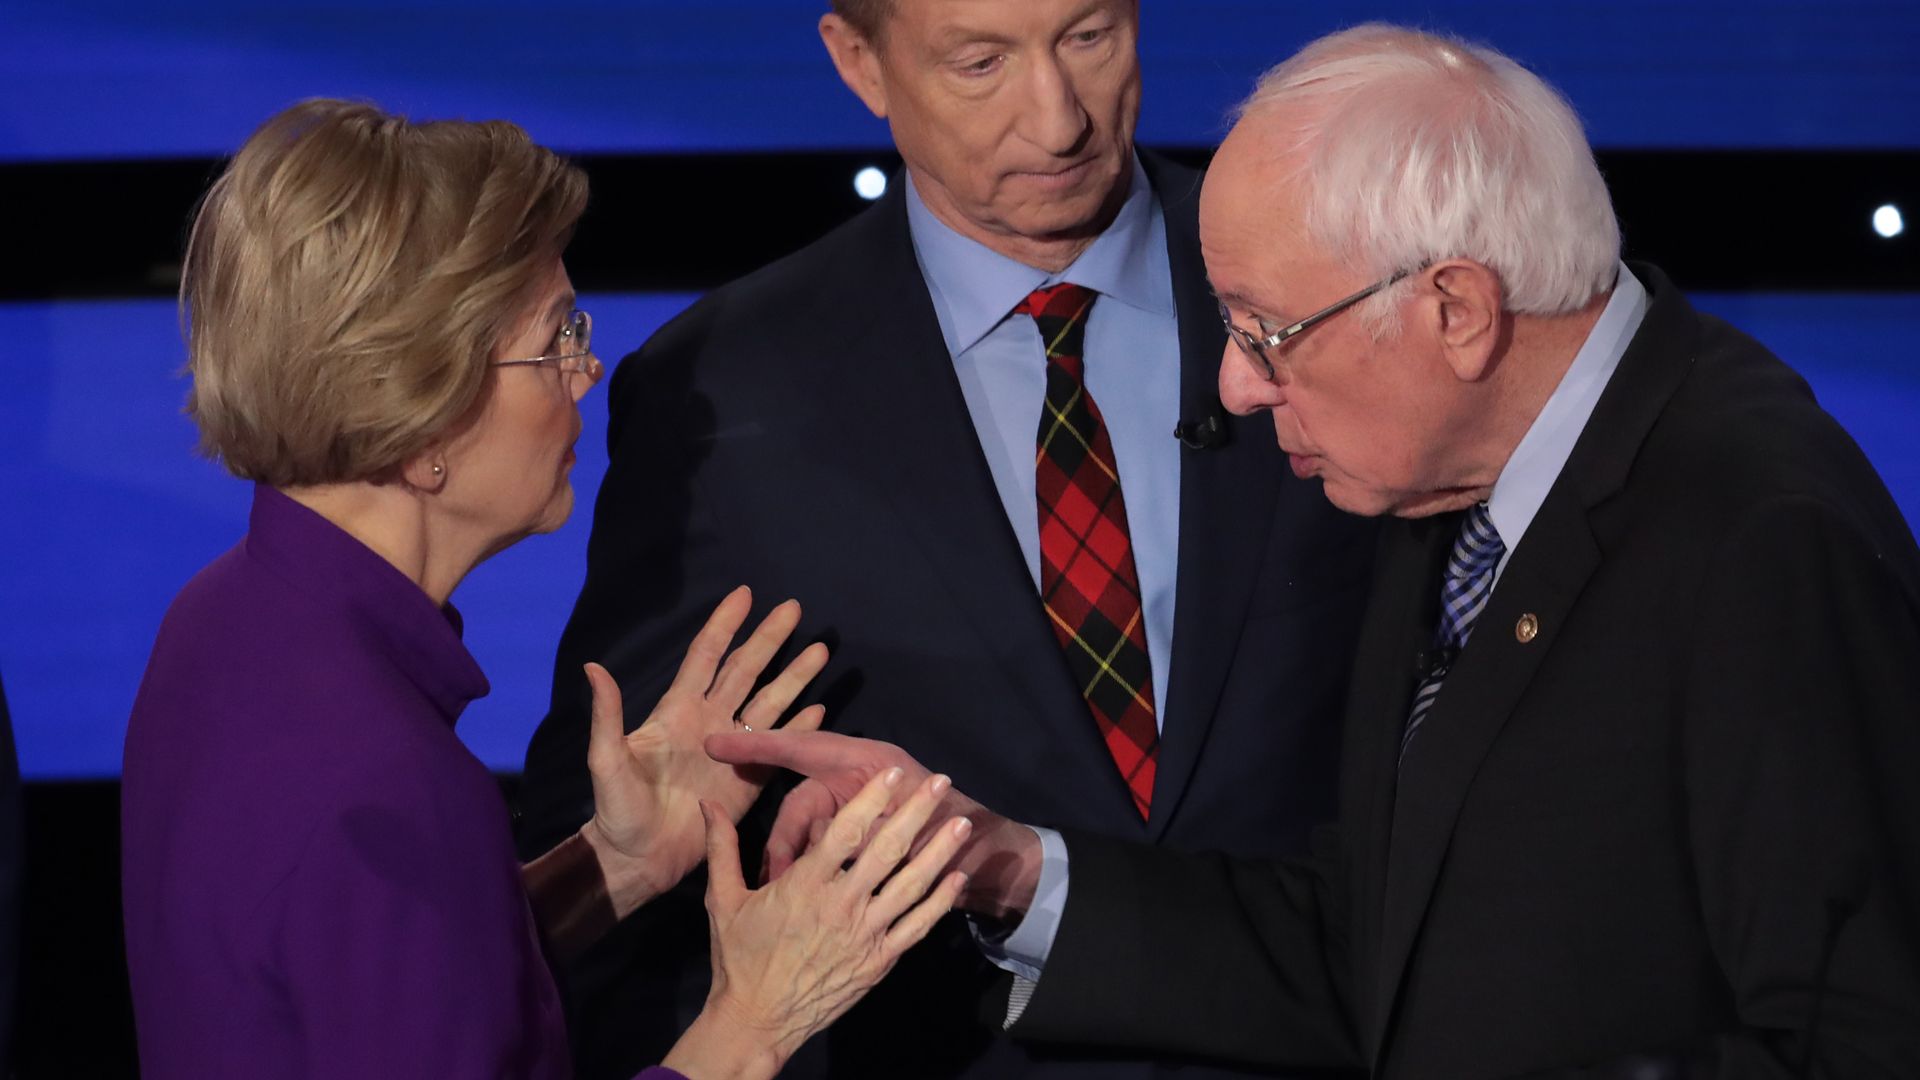 Elizabeth Warren and Bernie Sanders have a heated conversation in the moments following Tuesday's Democratic debate.